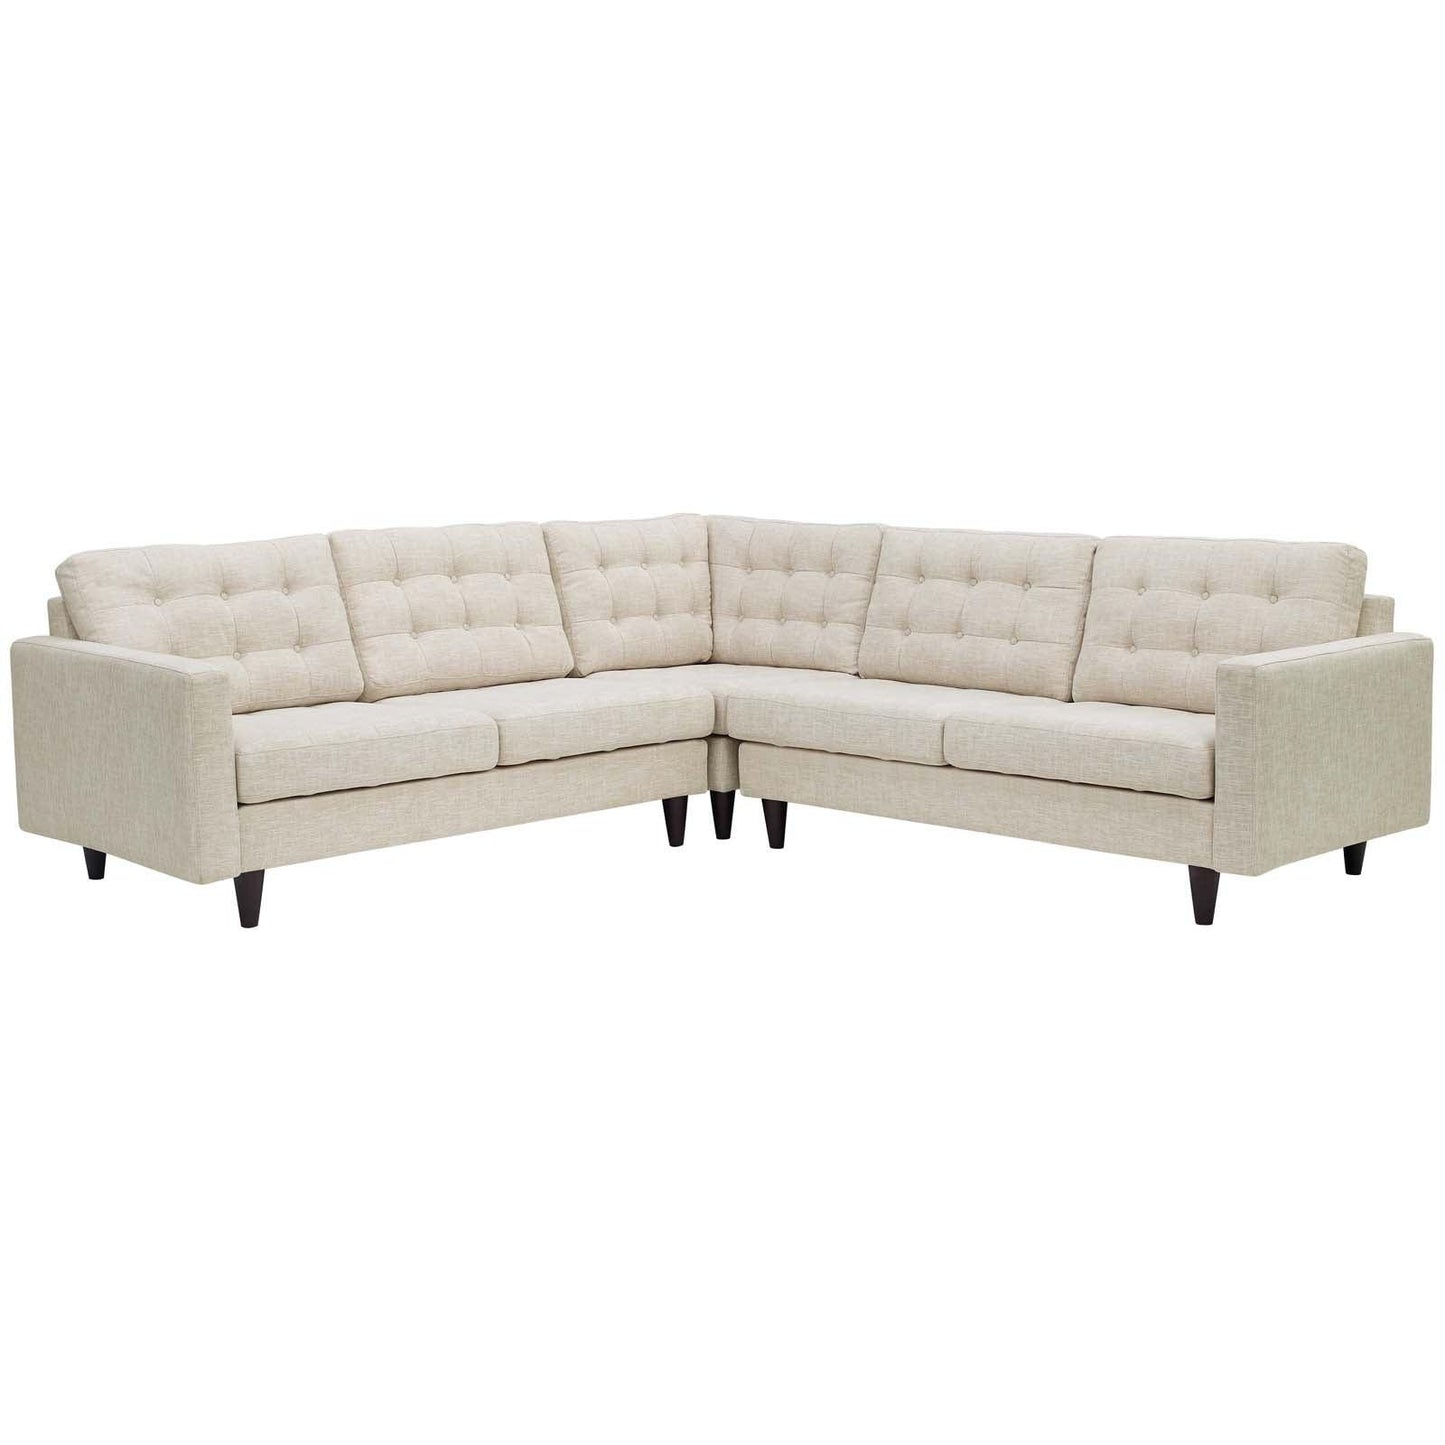 Modway Empress 3 Piece Upholstered Fabric Sectional Sofa Set FredCo